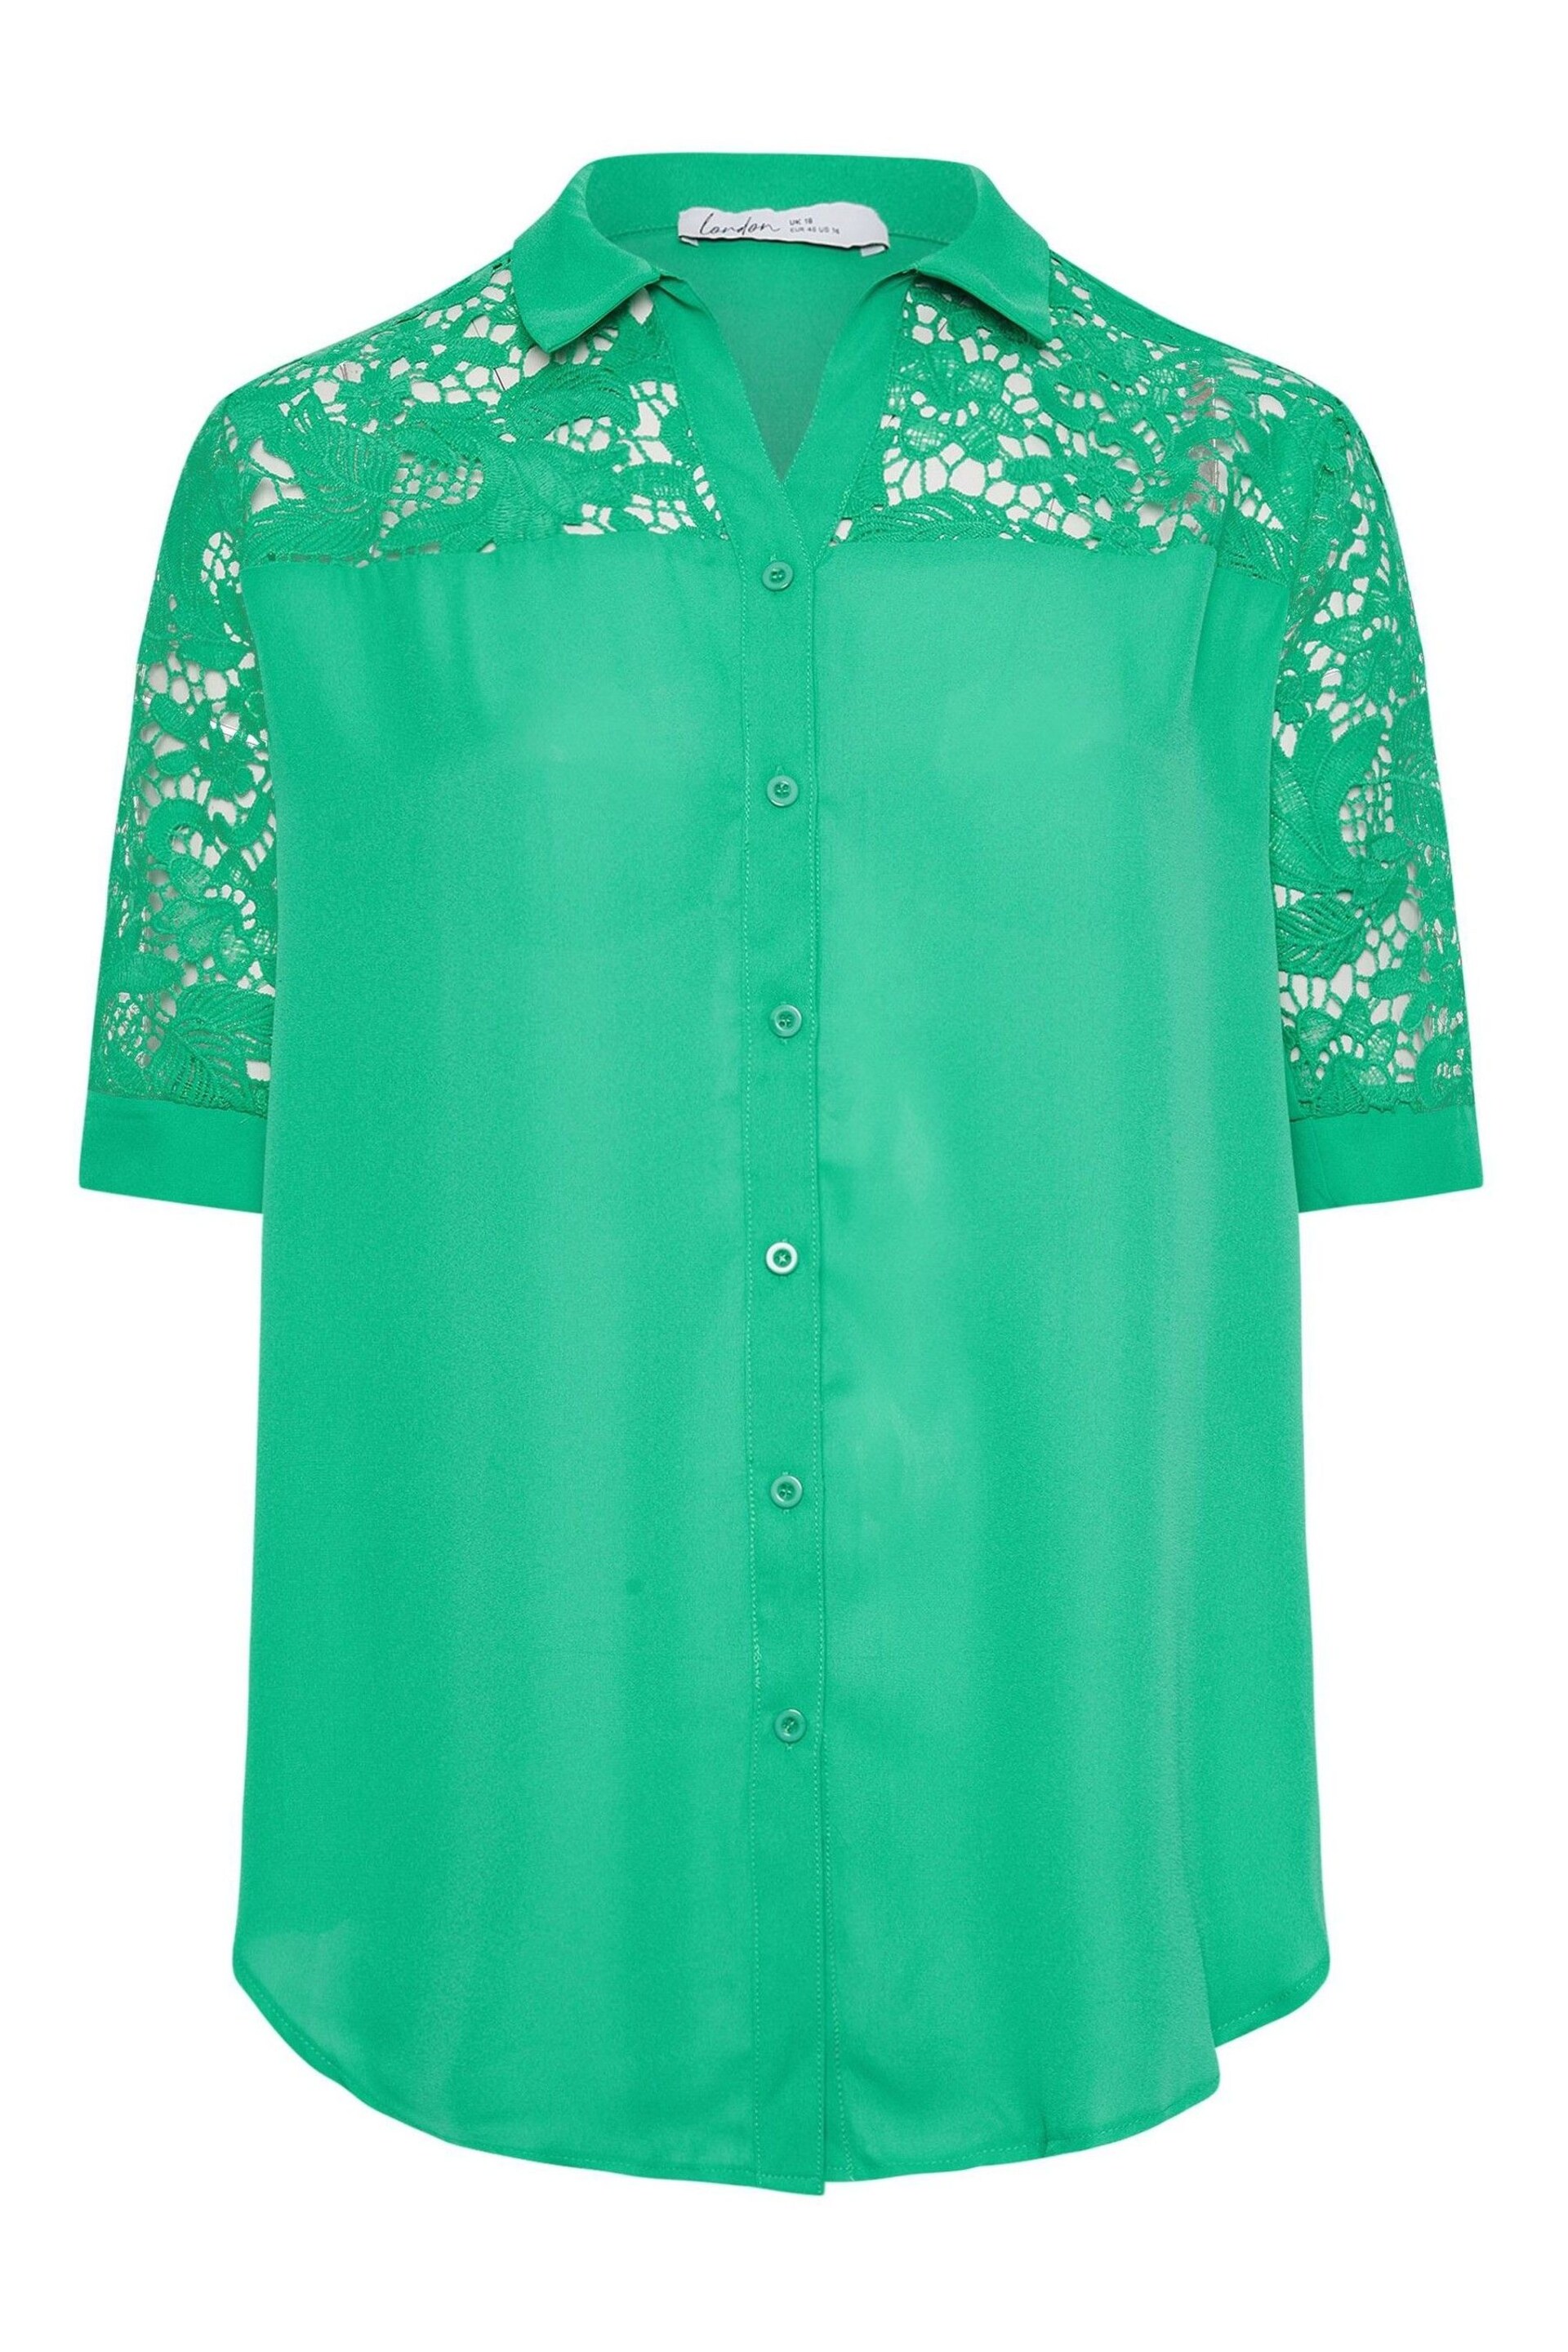 YOURS LONDON Curve Green Lace Sleeve Shirt - Image 2 of 2